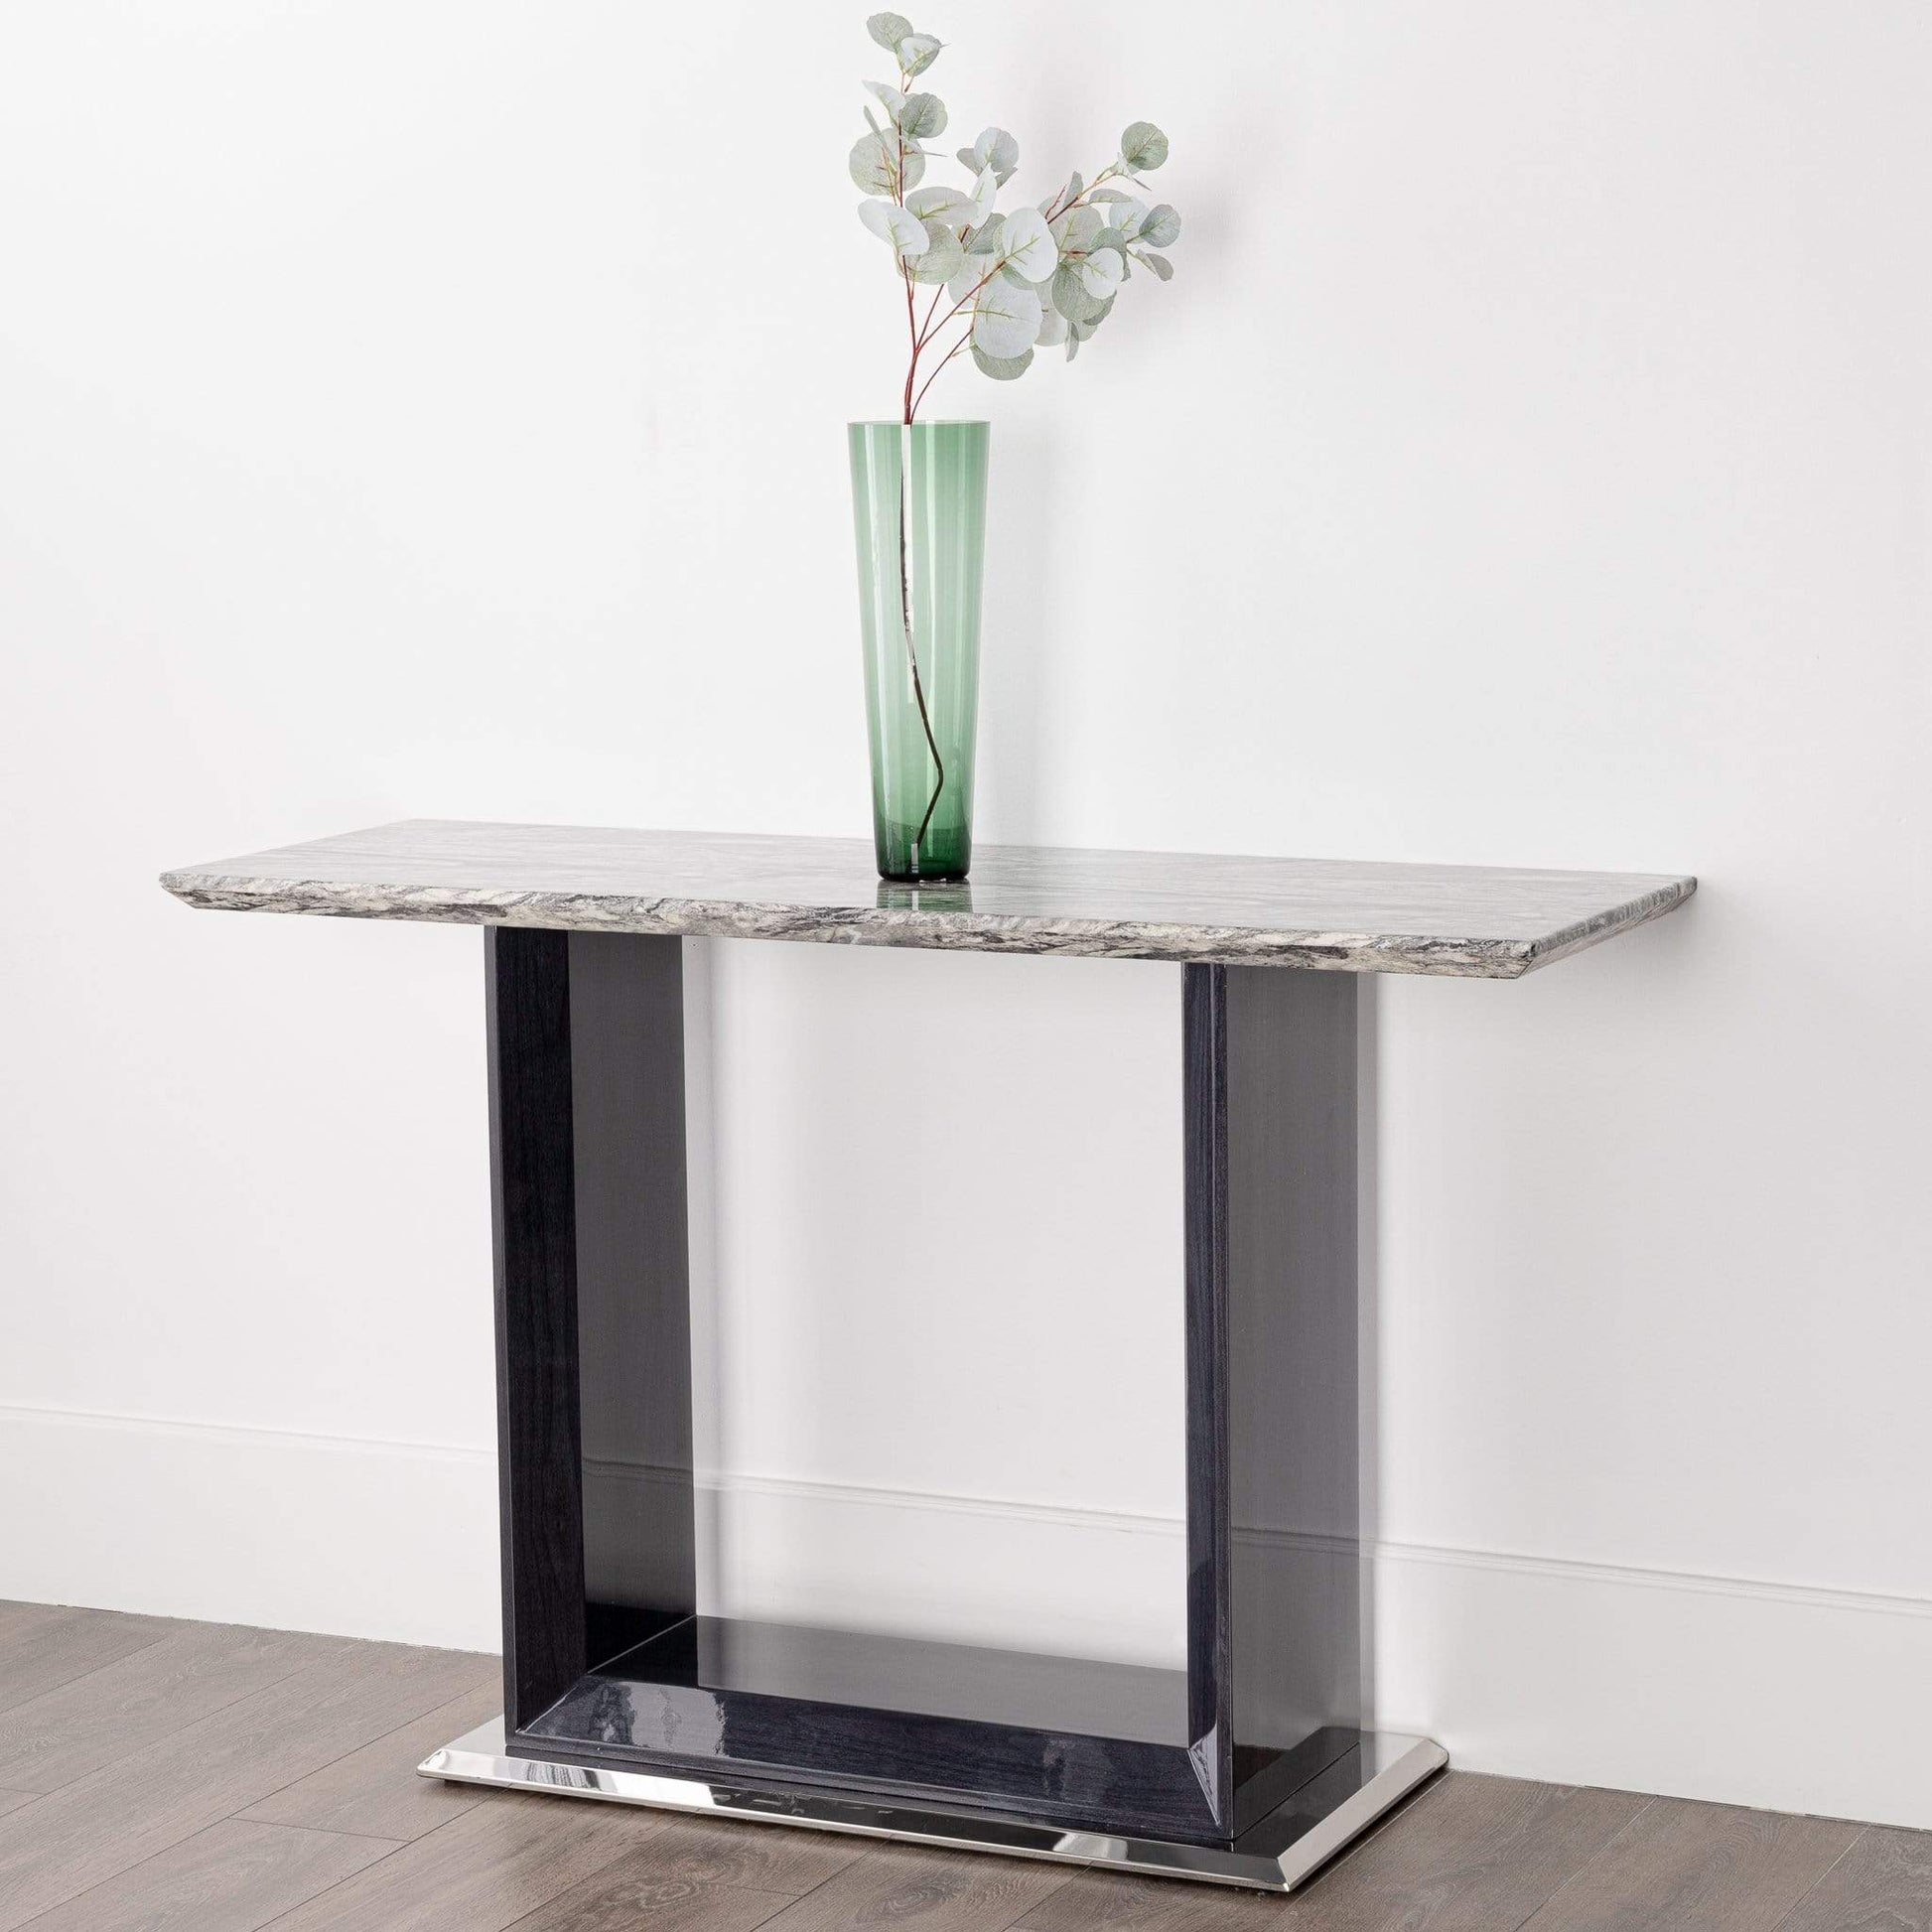 Furniture  -  Helena Grey Marble Console Table  -  50140764